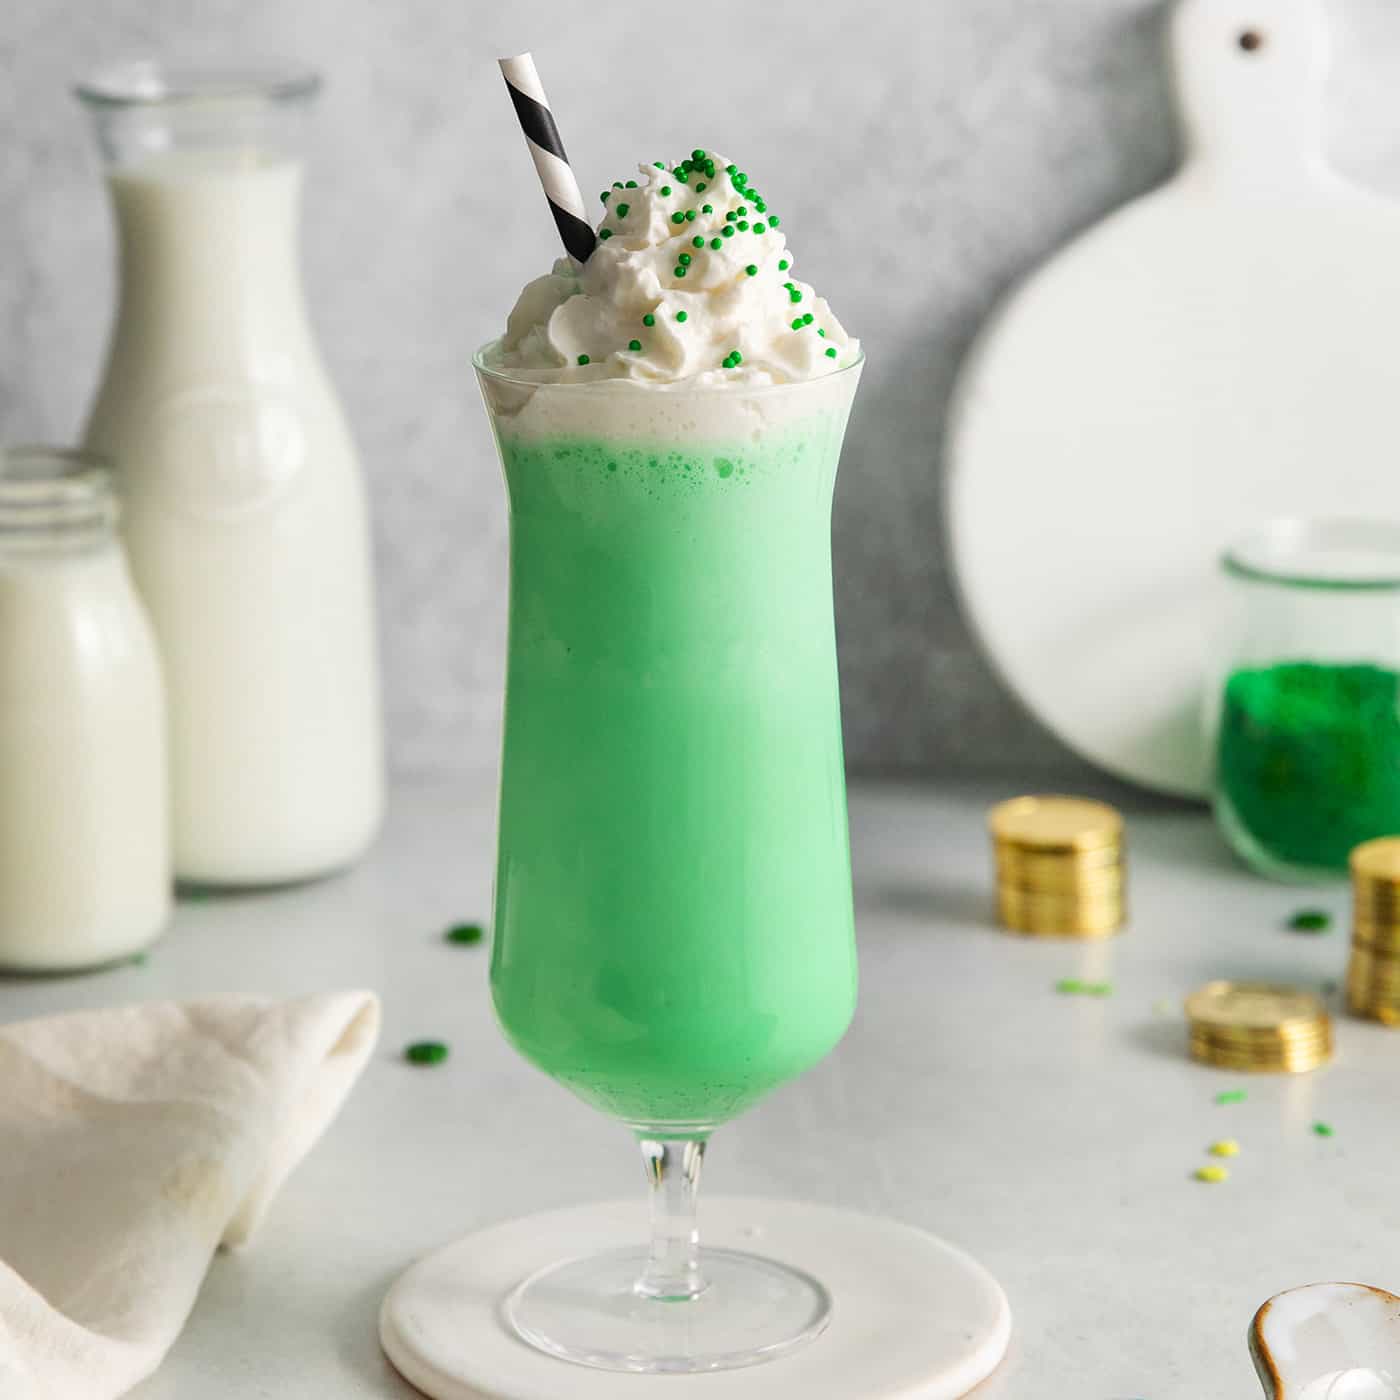 The Shamrock Shake is a classic St. Patrick’s Day staple – this ice cream drink is creamy and refreshing with mint flavor!